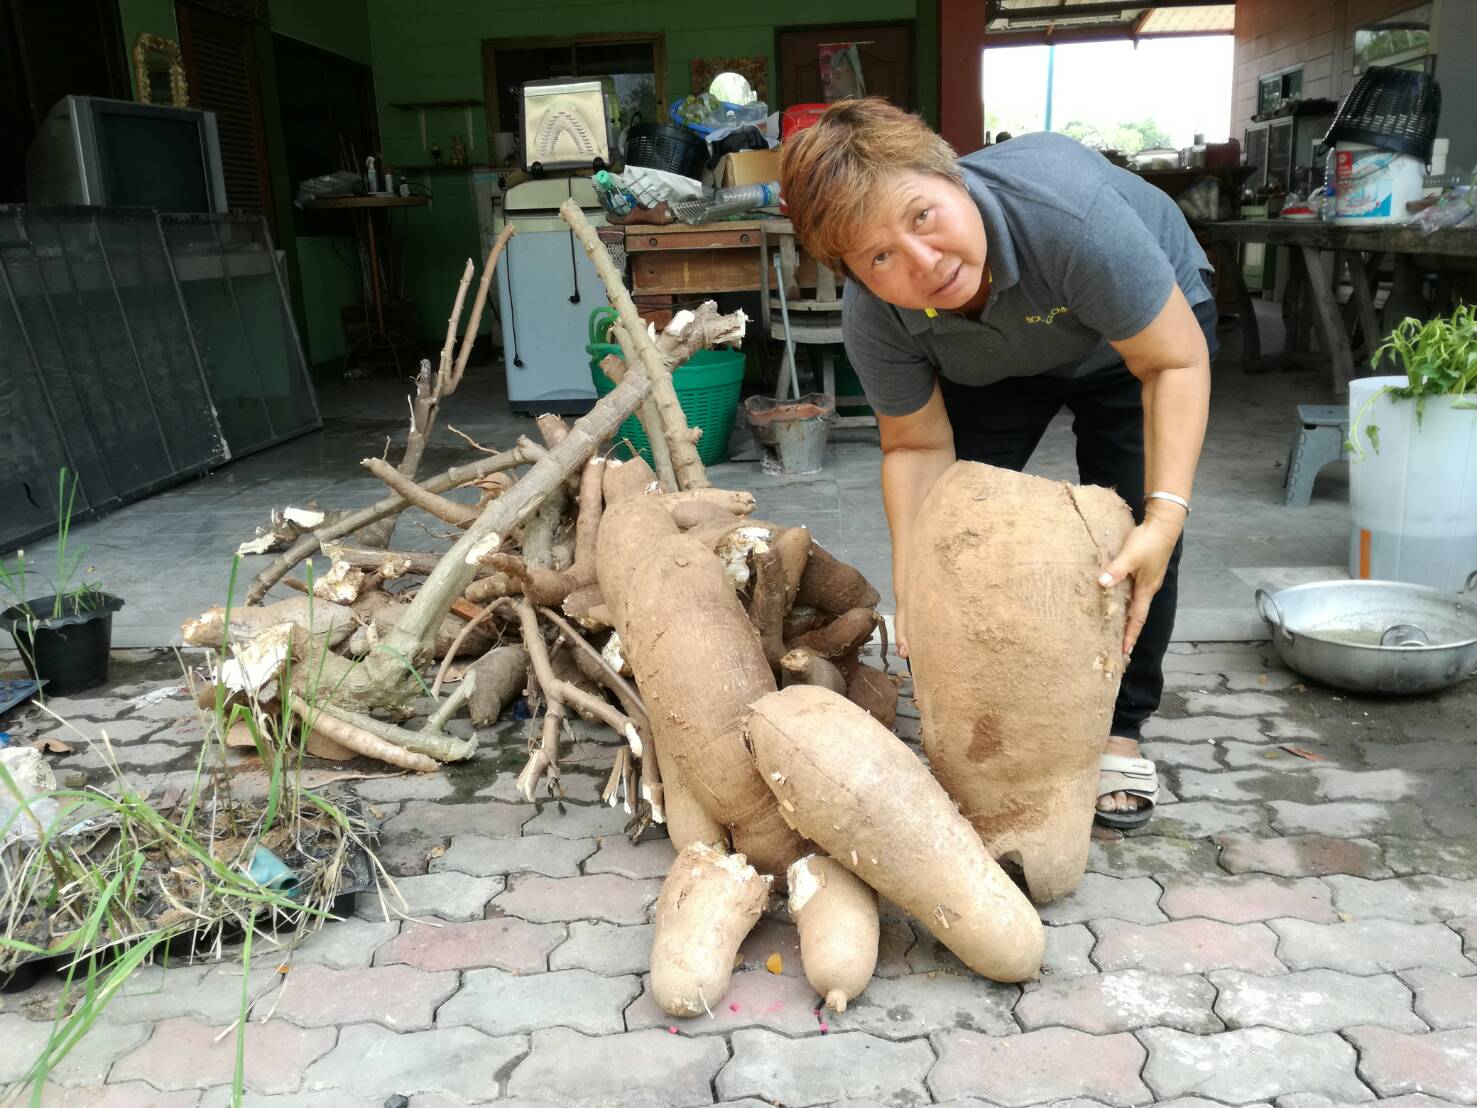 Chaweewan Bill, who grows vegetables in the backyard of her house on Soi Wat Boonkanjanaram 8, dug up a cassava tuber weighing in excess of 25 kilograms, about 150 percent larger than average for her garden. A helper also dug up two nearby tubers weighing 20 kg. and 15 kg.